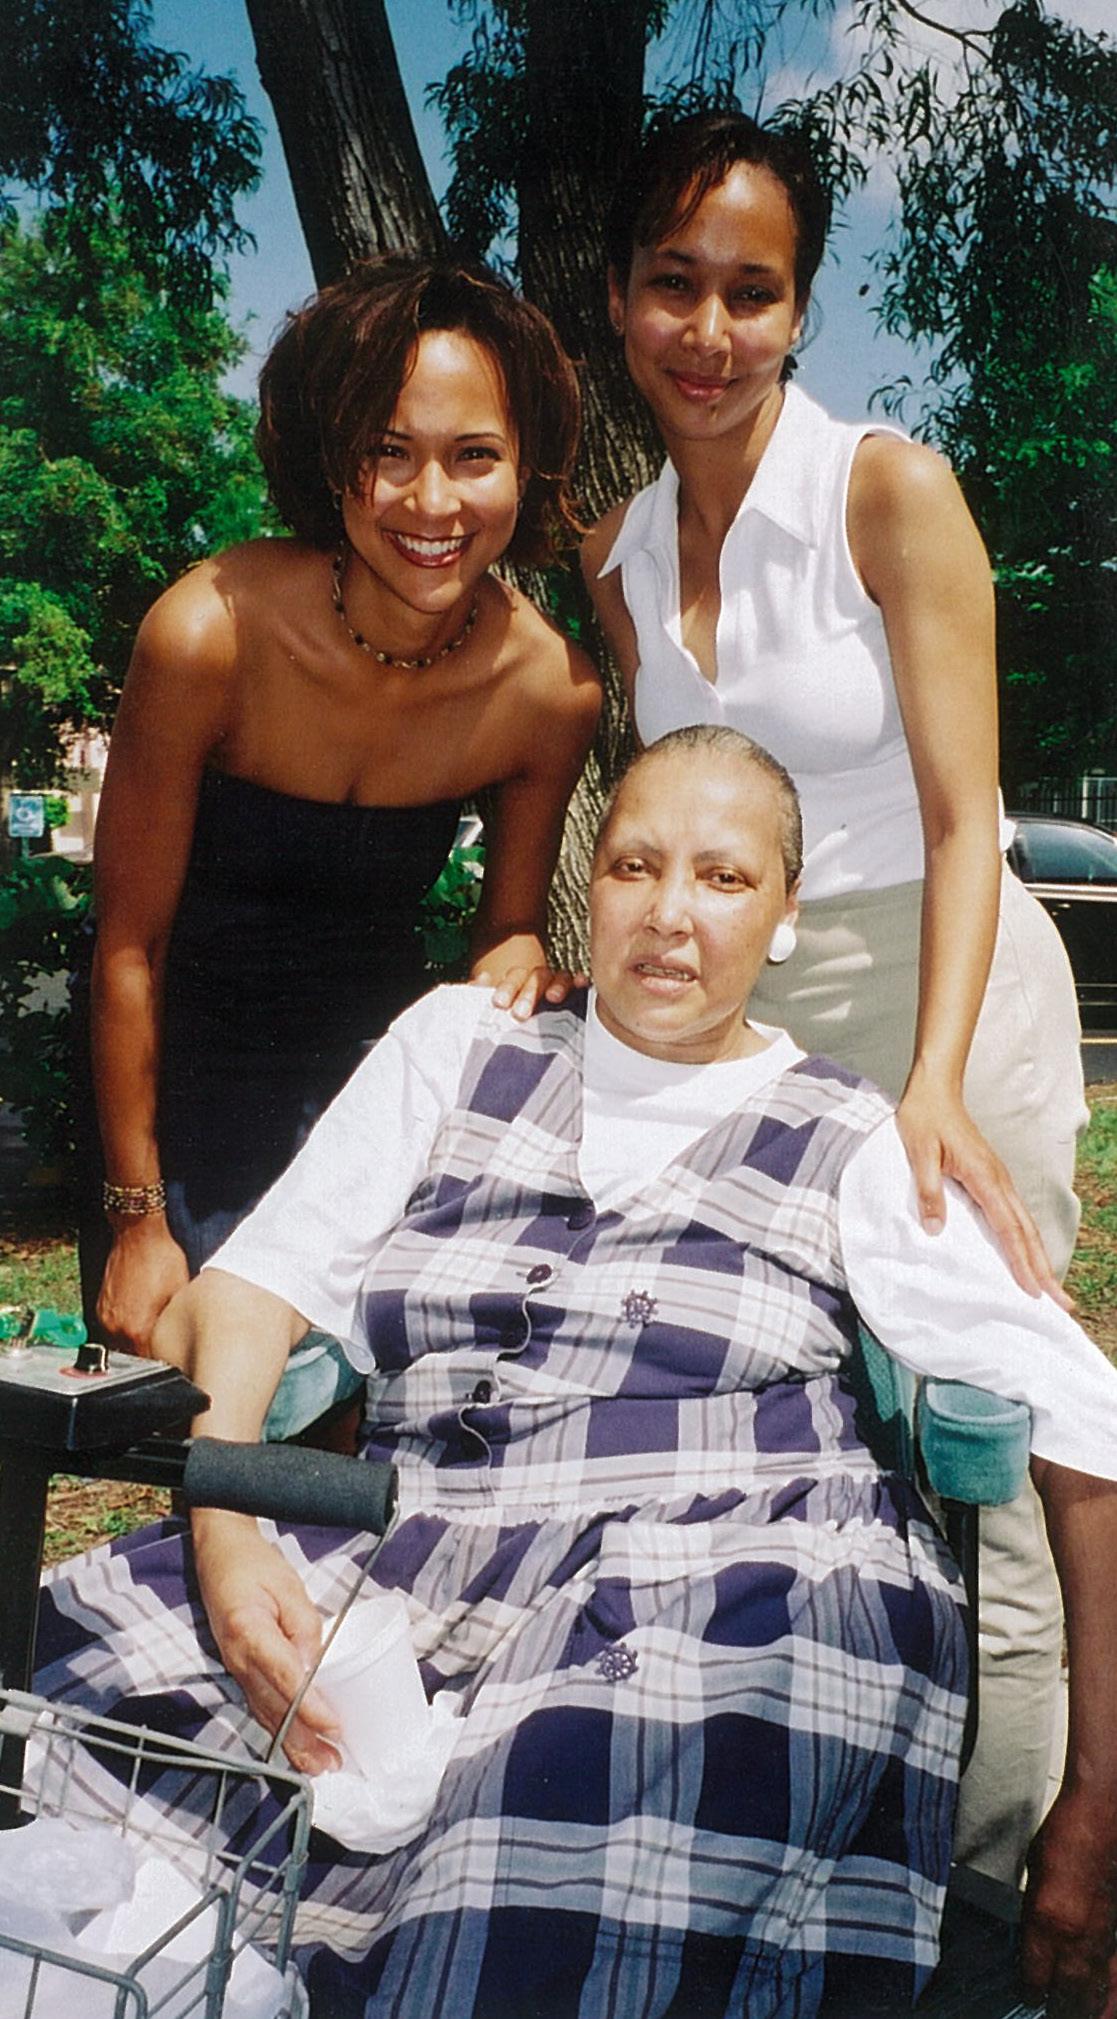 Joyce Jackson with her nieces Ashley and Pamela in 2001 in Miami, Florida. (Courtesy of Thelma Stiles)